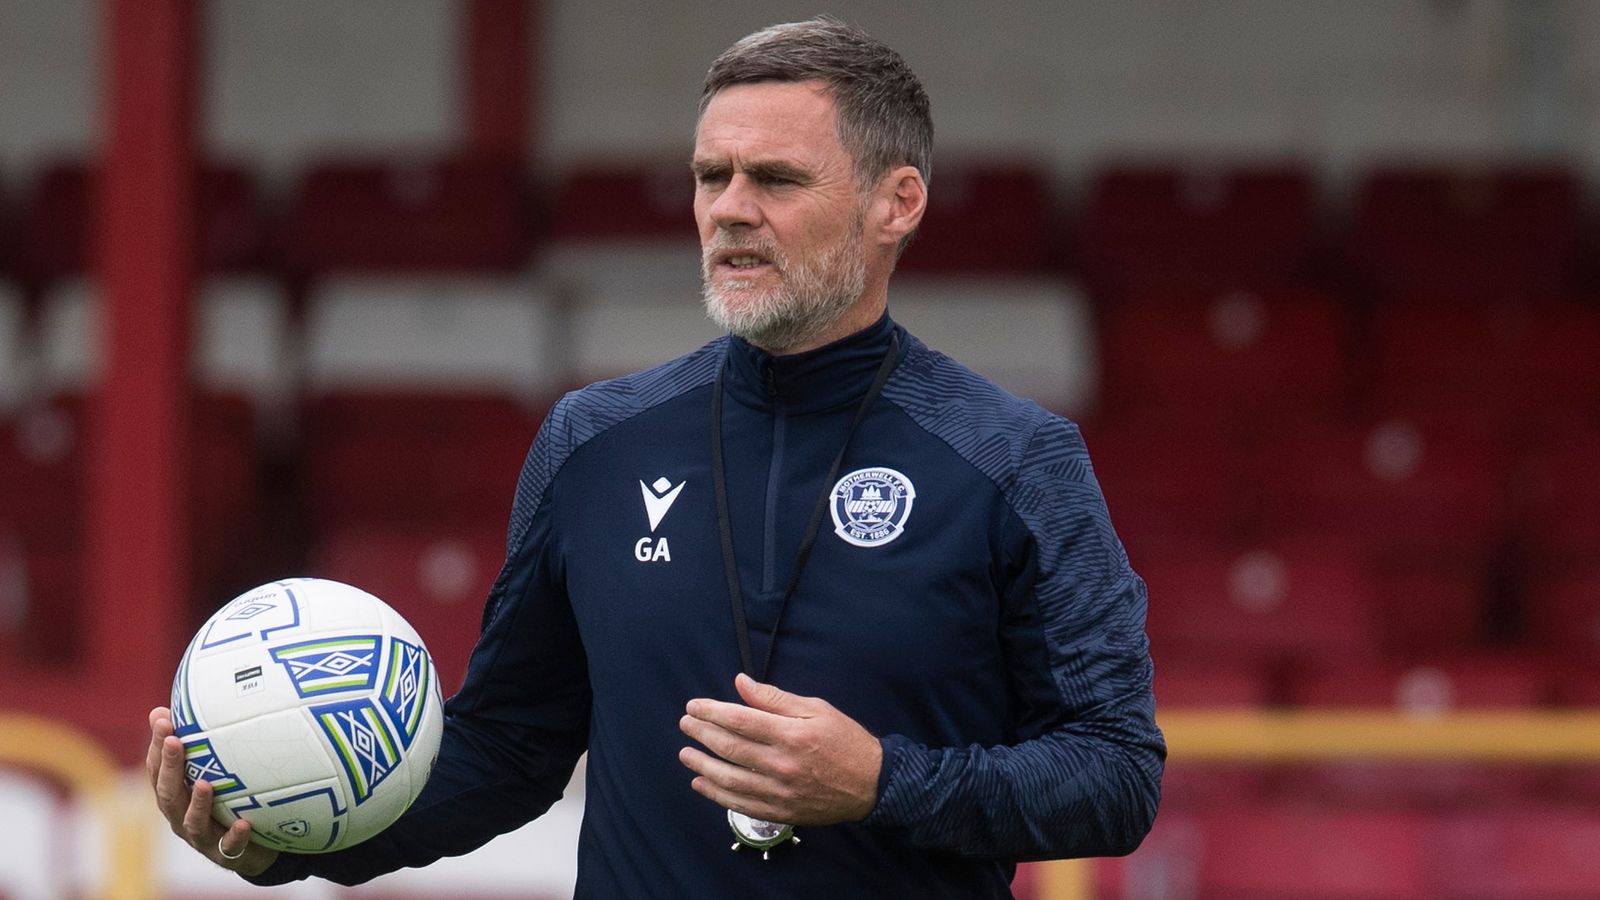 Motherwell's new manager search: Graham Alexander reflects on his time at club and challenges that await new boss